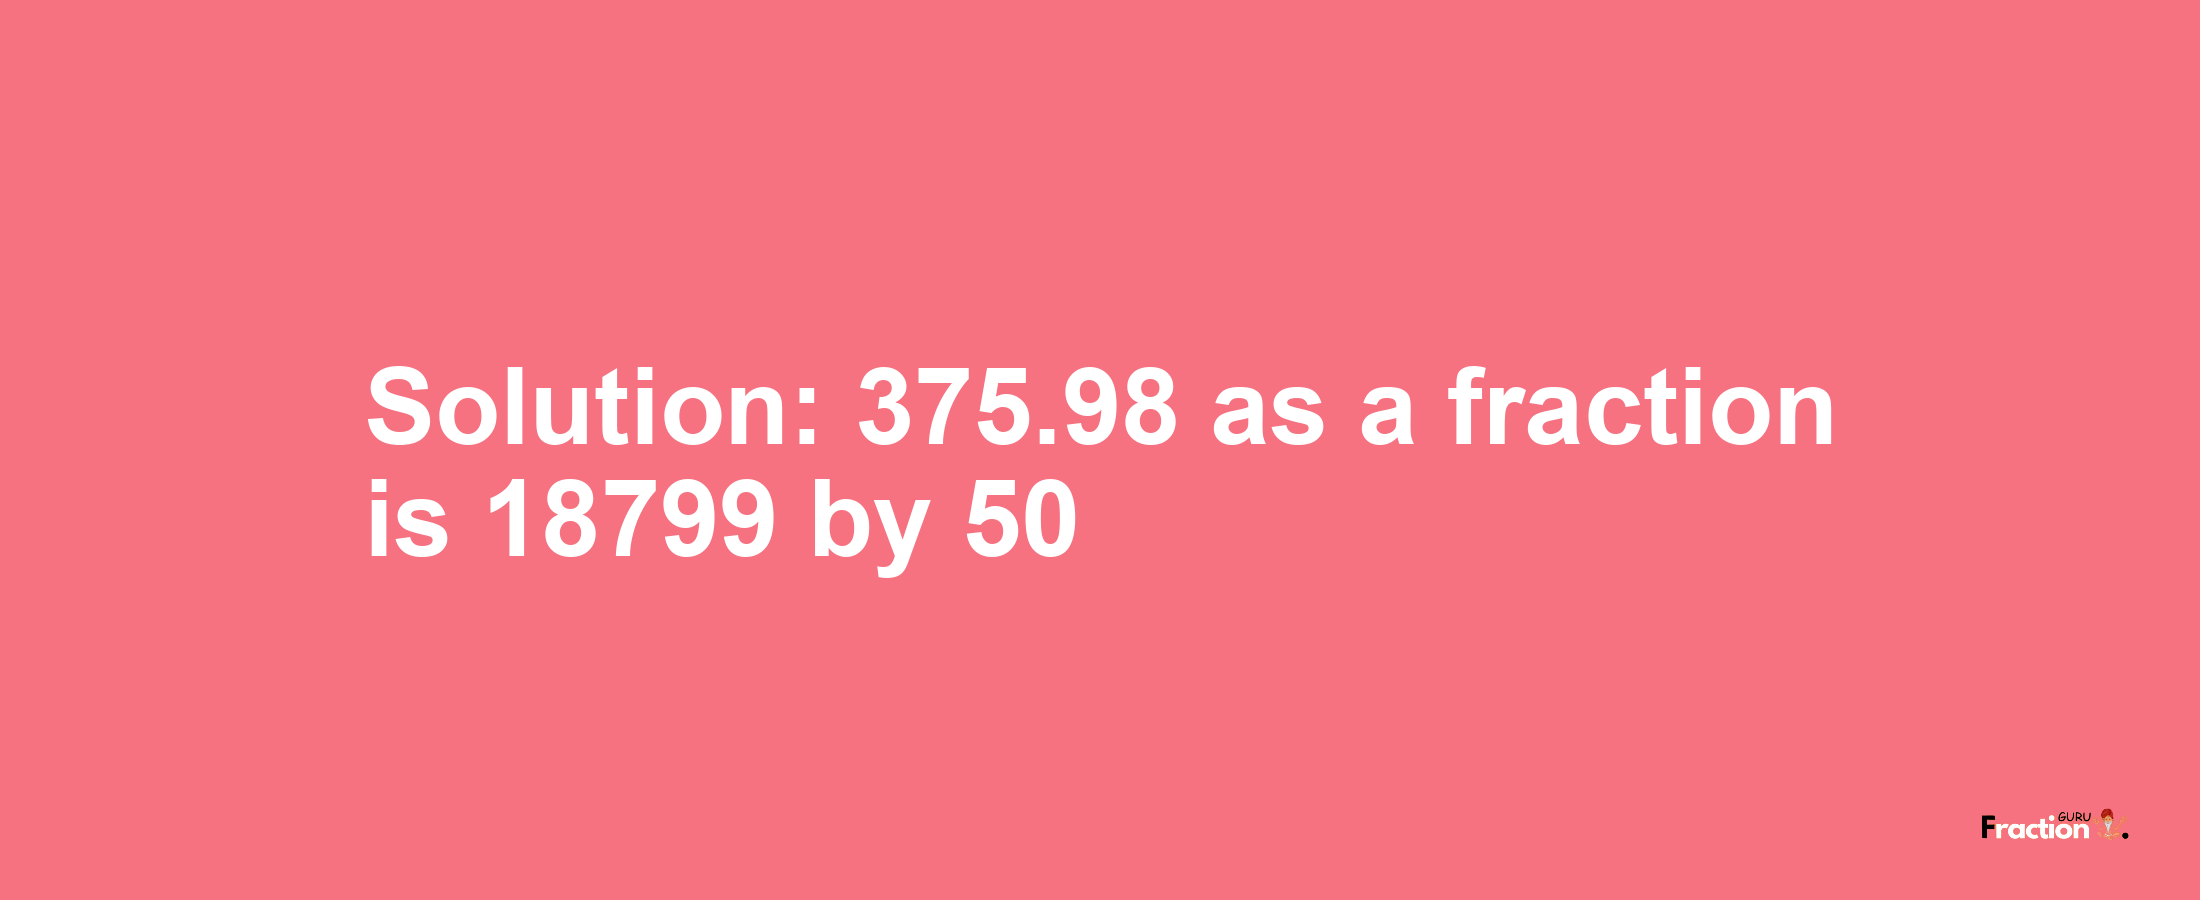 Solution:375.98 as a fraction is 18799/50